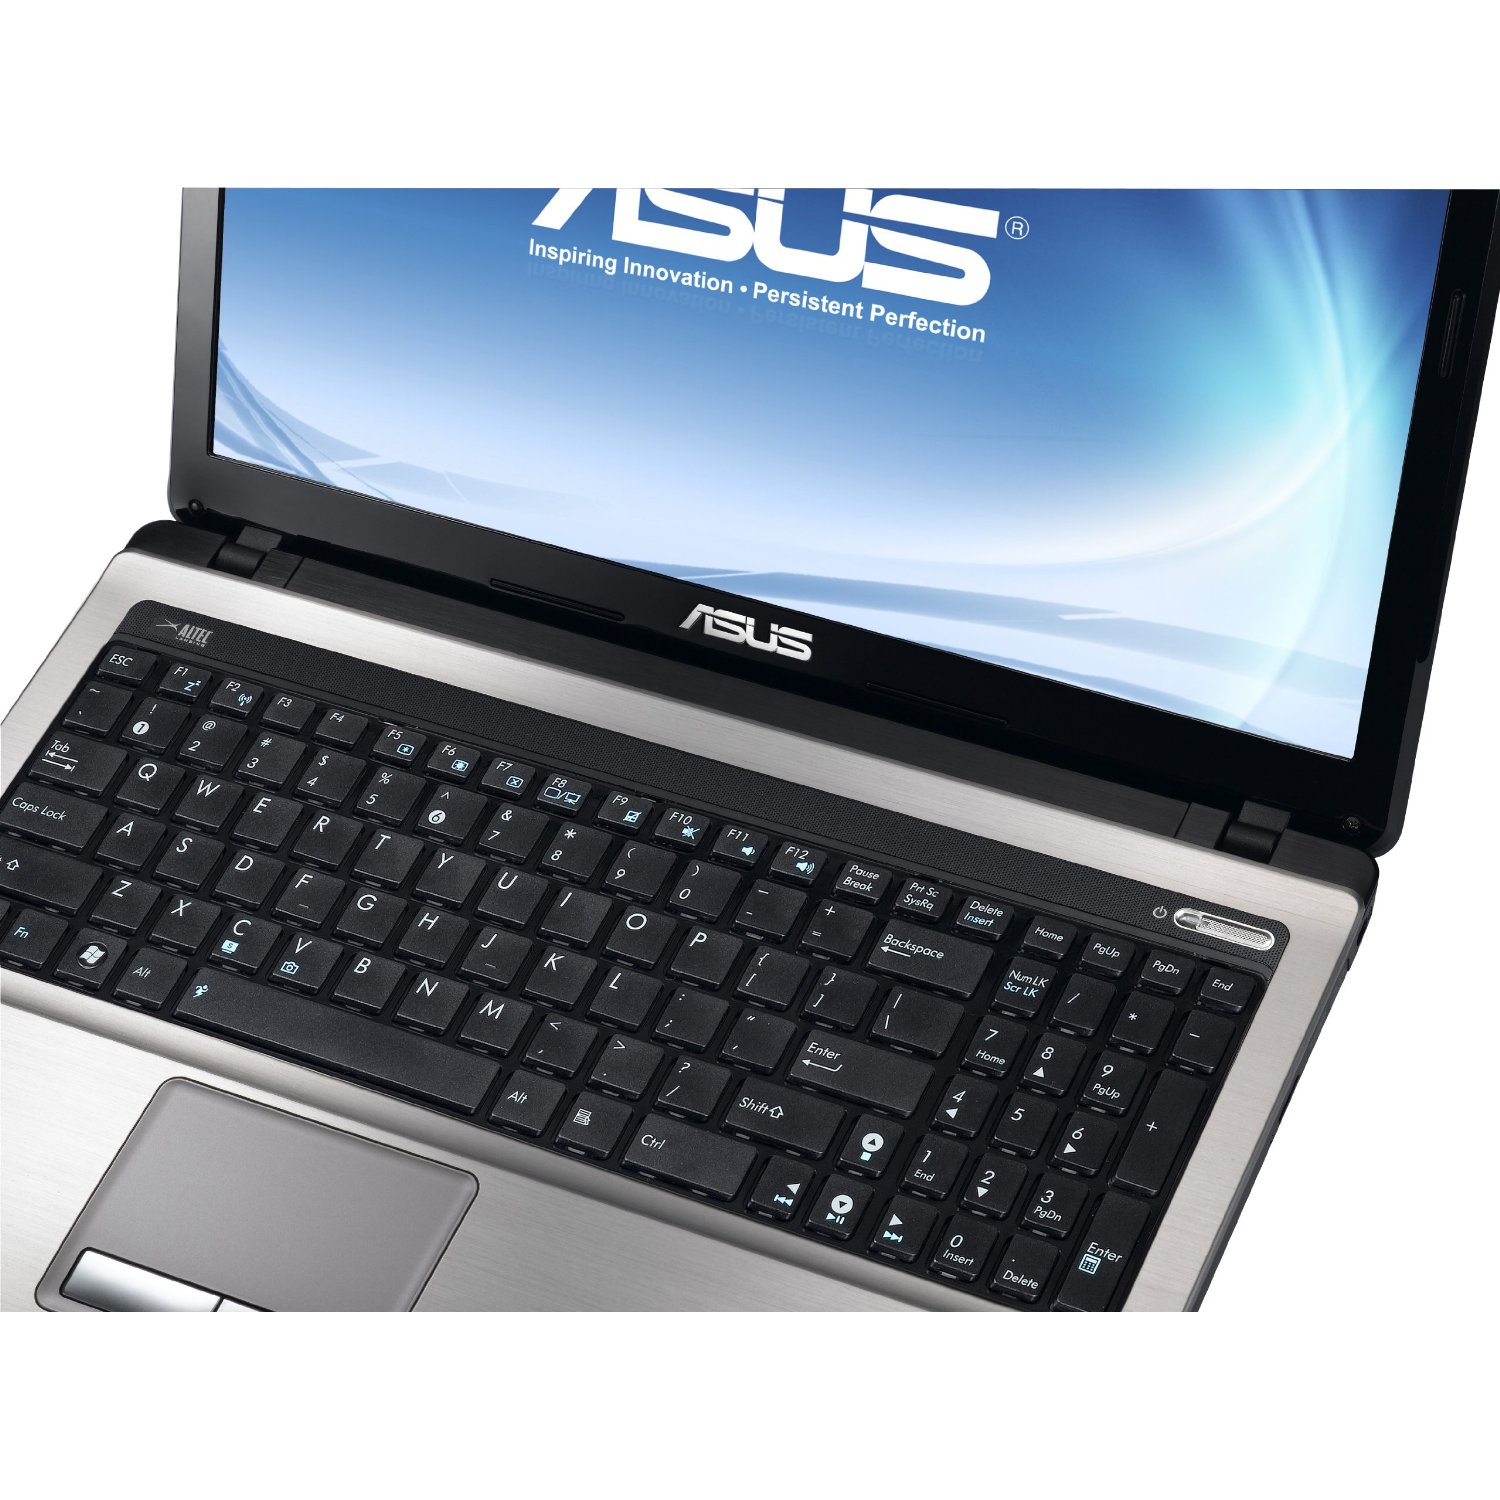 http://thetechjournal.com/wp-content/uploads/images/1204/1335535237-asus-brings-new-a53ees31-156inch-laptop-8.jpg